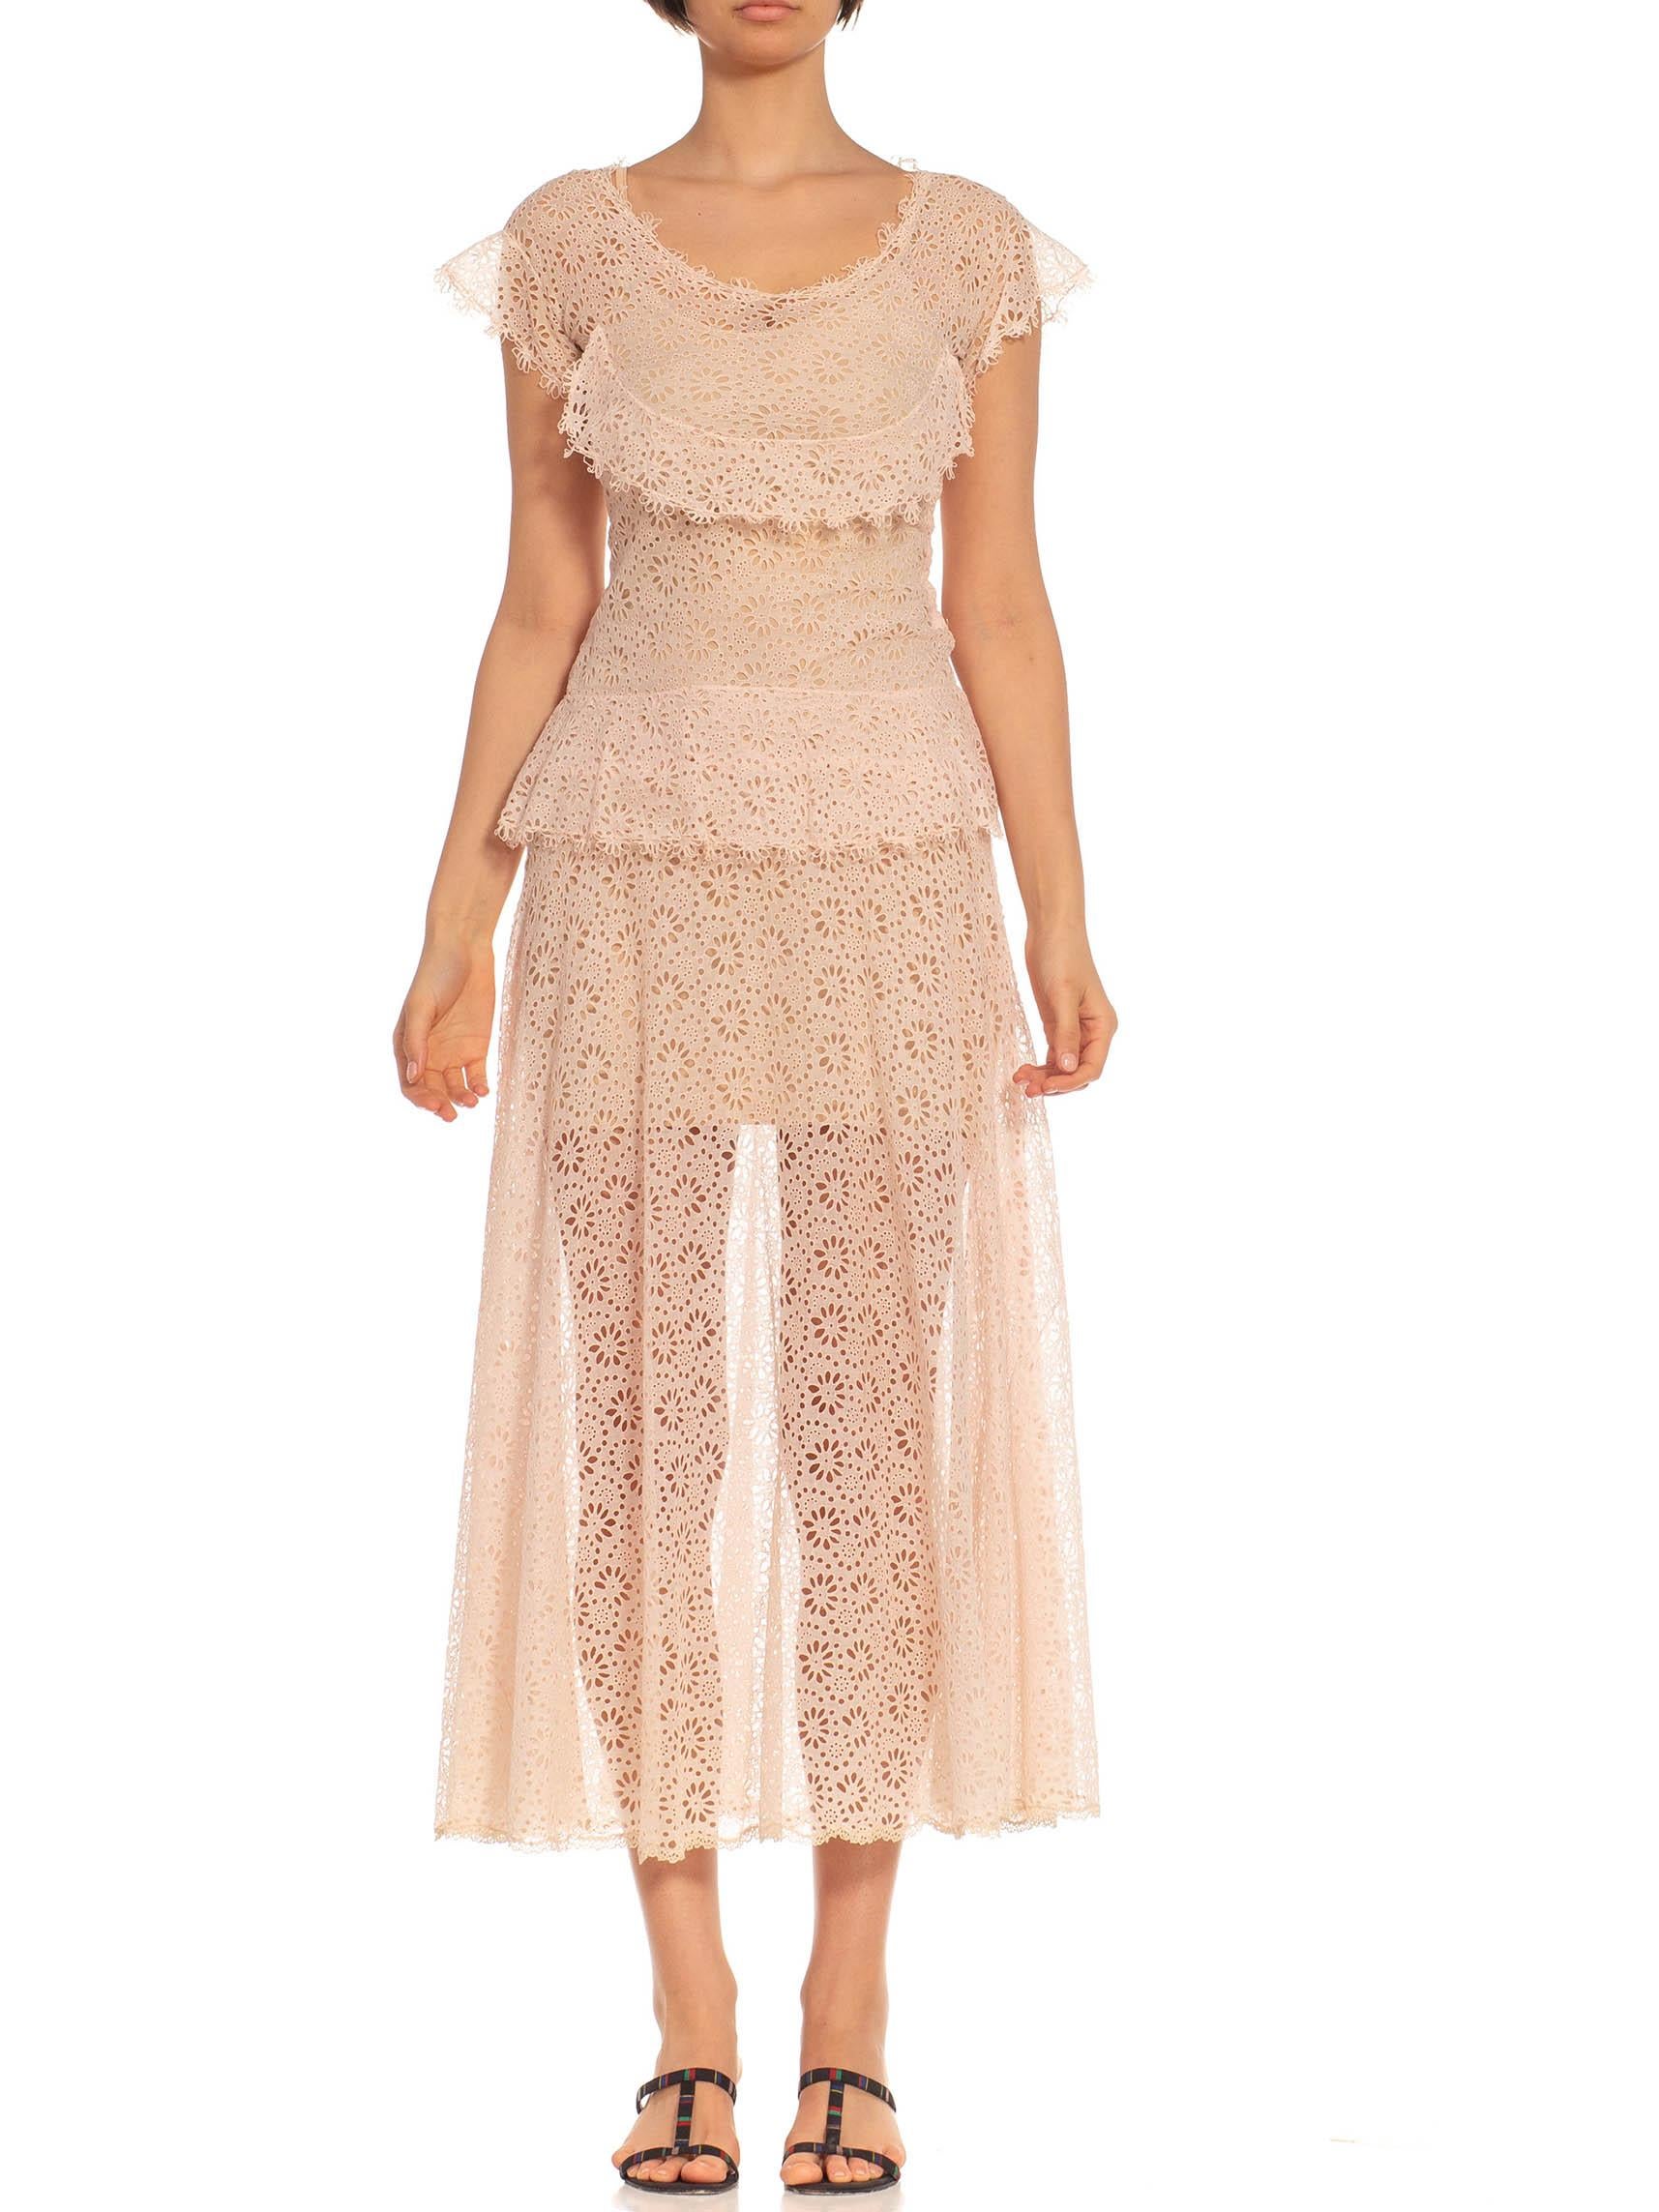 1940S Light Pink Cotton Eyelet Lace Dress For Sale 2